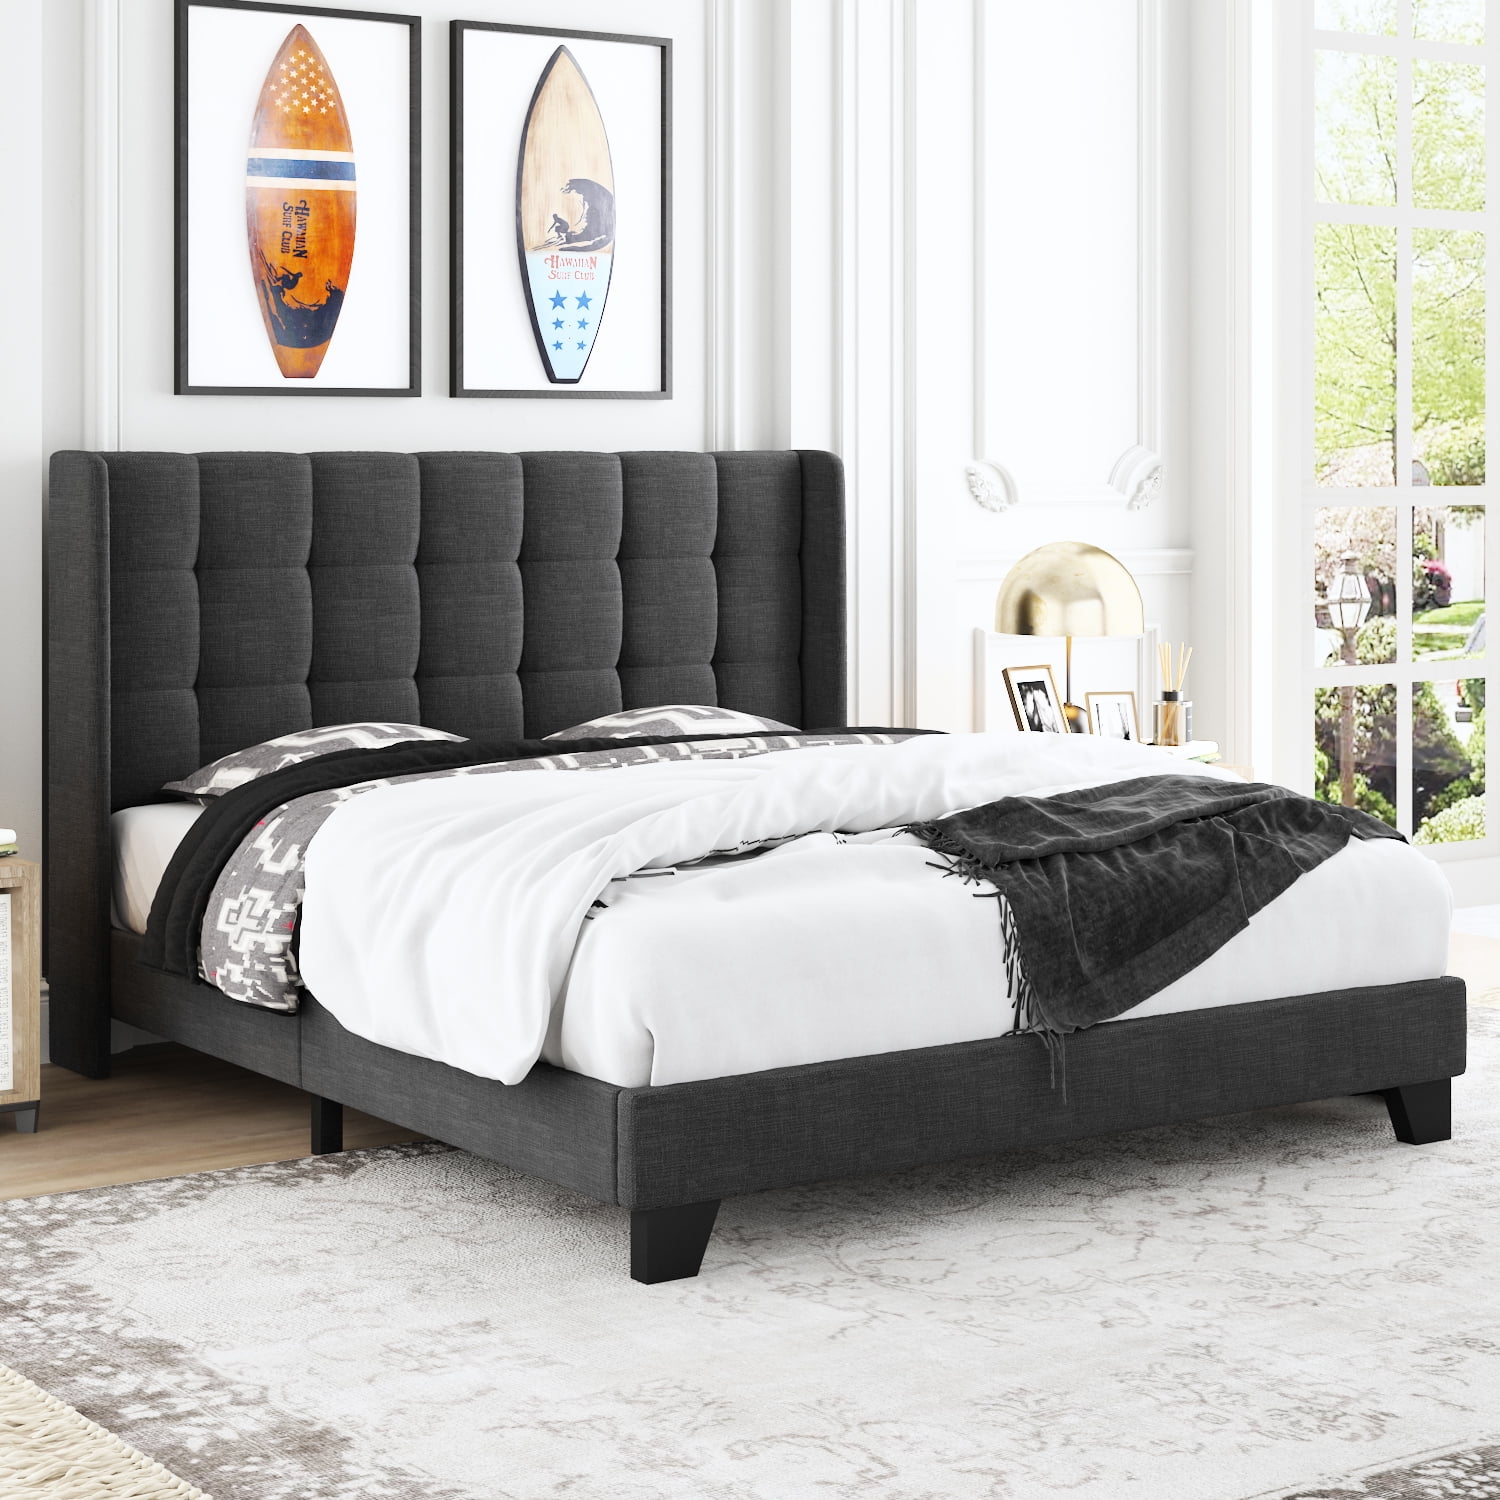 Allewie Full Size Platform Bed Frame with Wingback Fabric Upholstered Square Stitched Headboard and Wooden Slats, Grey